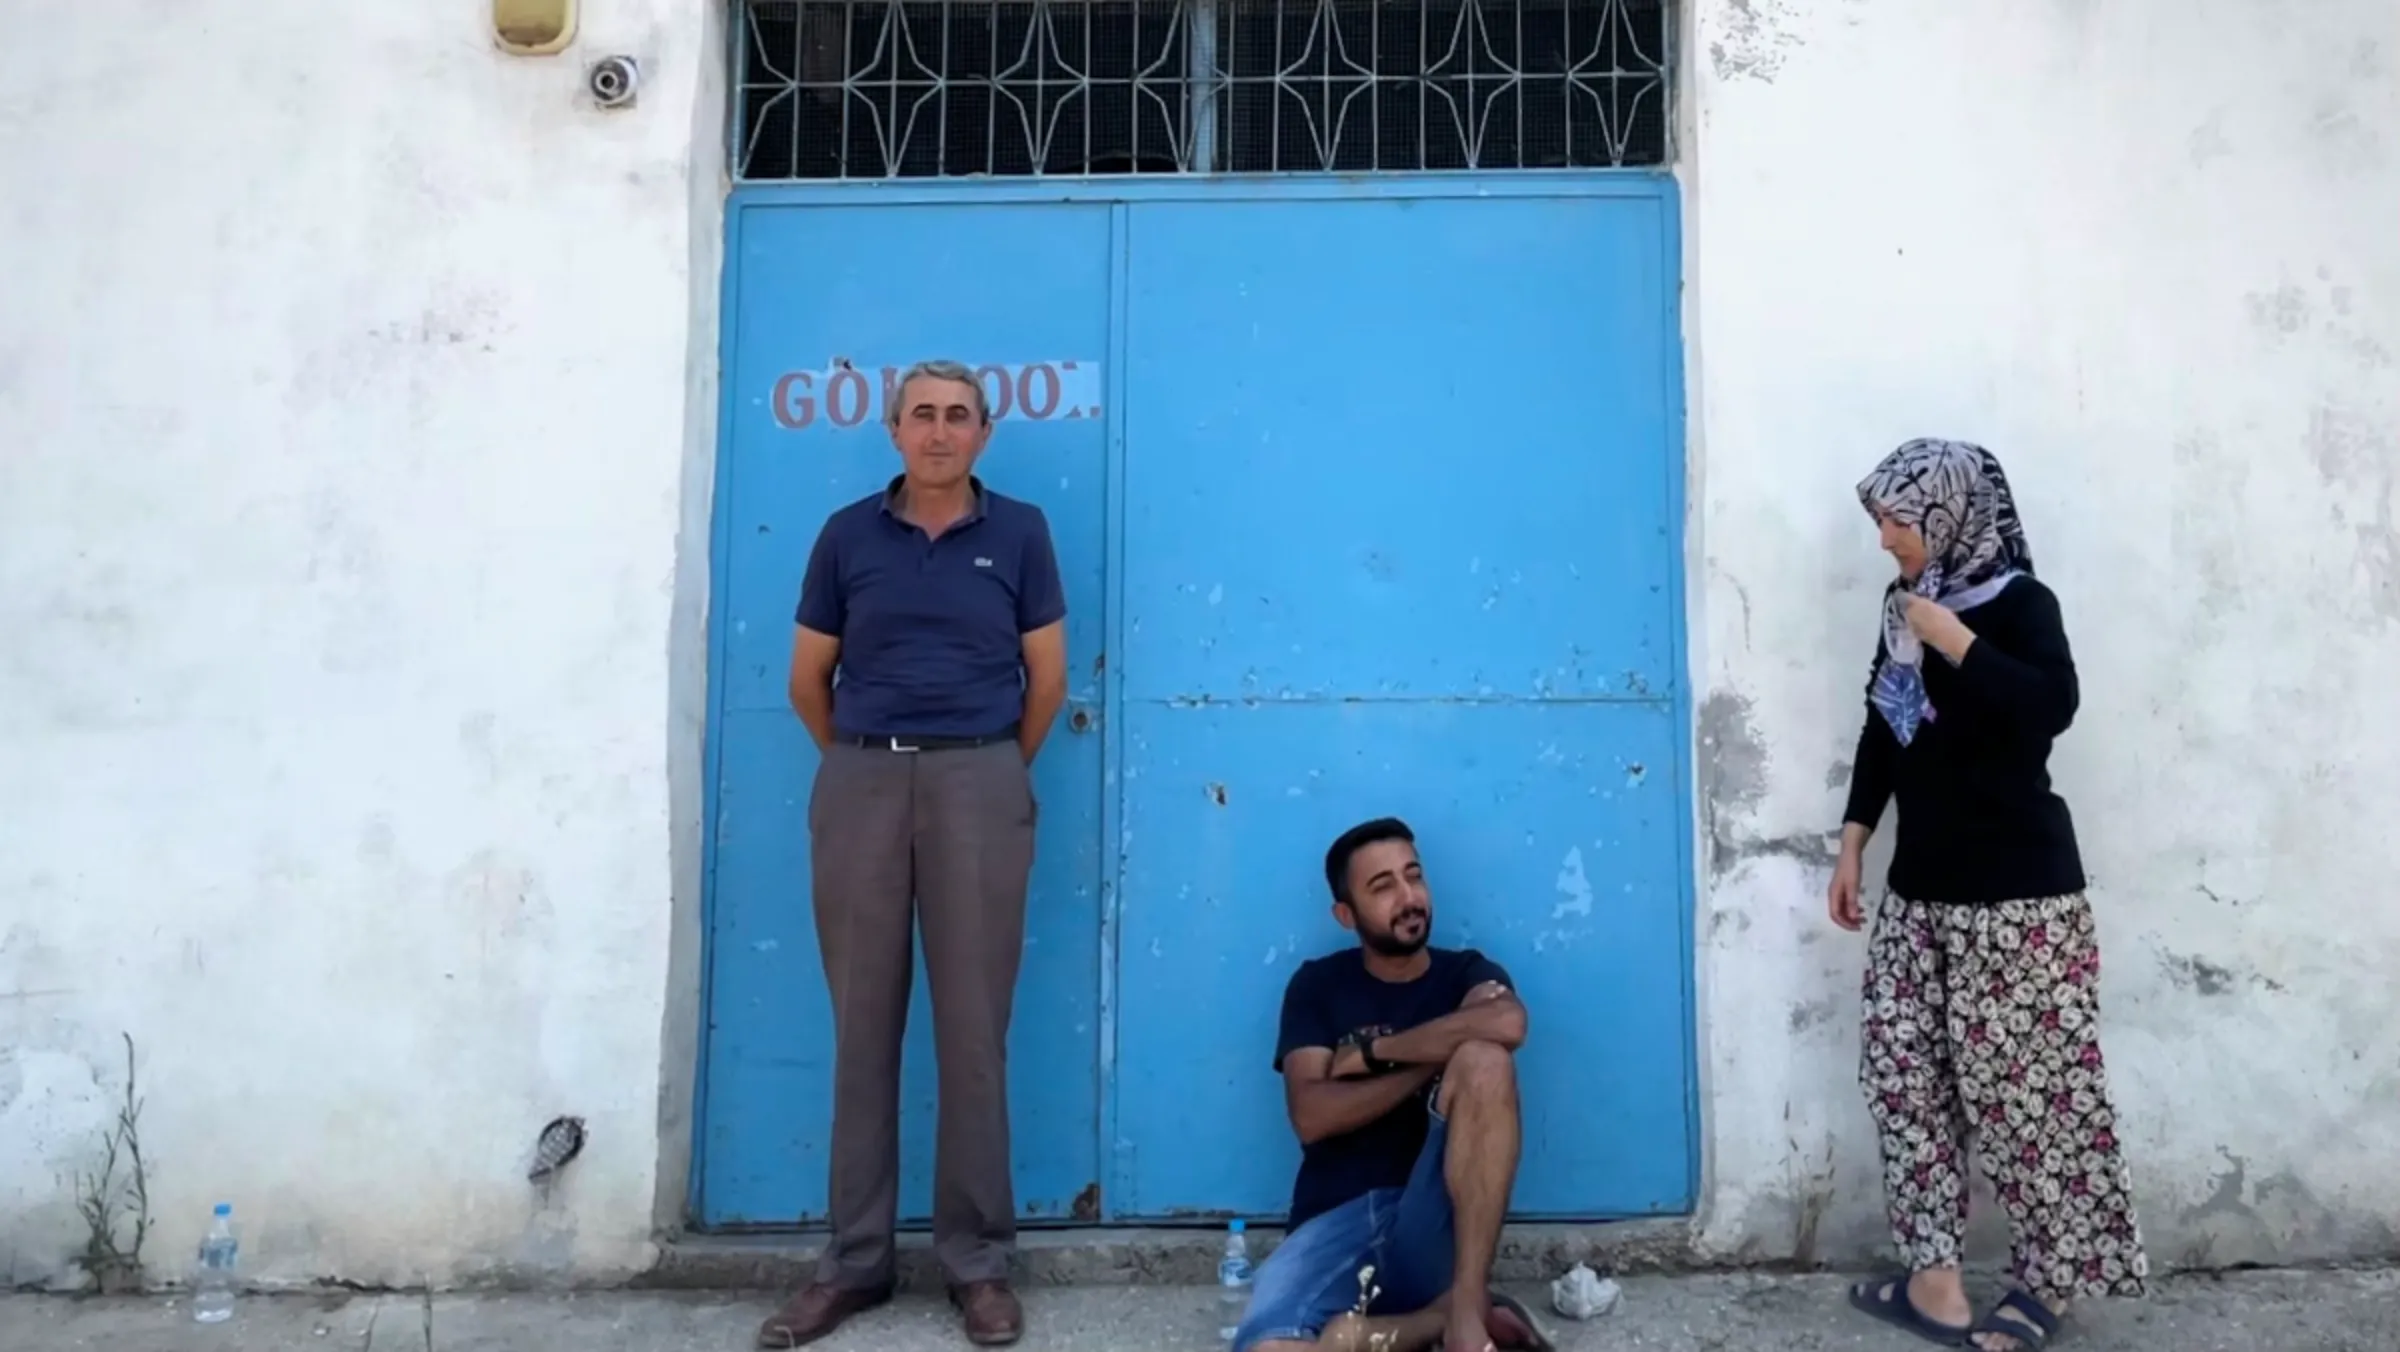 Former fisherman Mehmet Erefe, stands with his cousin Ali Erefe and neighbour Nimet Sezen outside the abandoned fishermen’s cooperative building on the edge of Lake Marmara, Manisa, Turkey. July 13, 2023. Thomson Reuters Foundation/Beatrice Tridimas